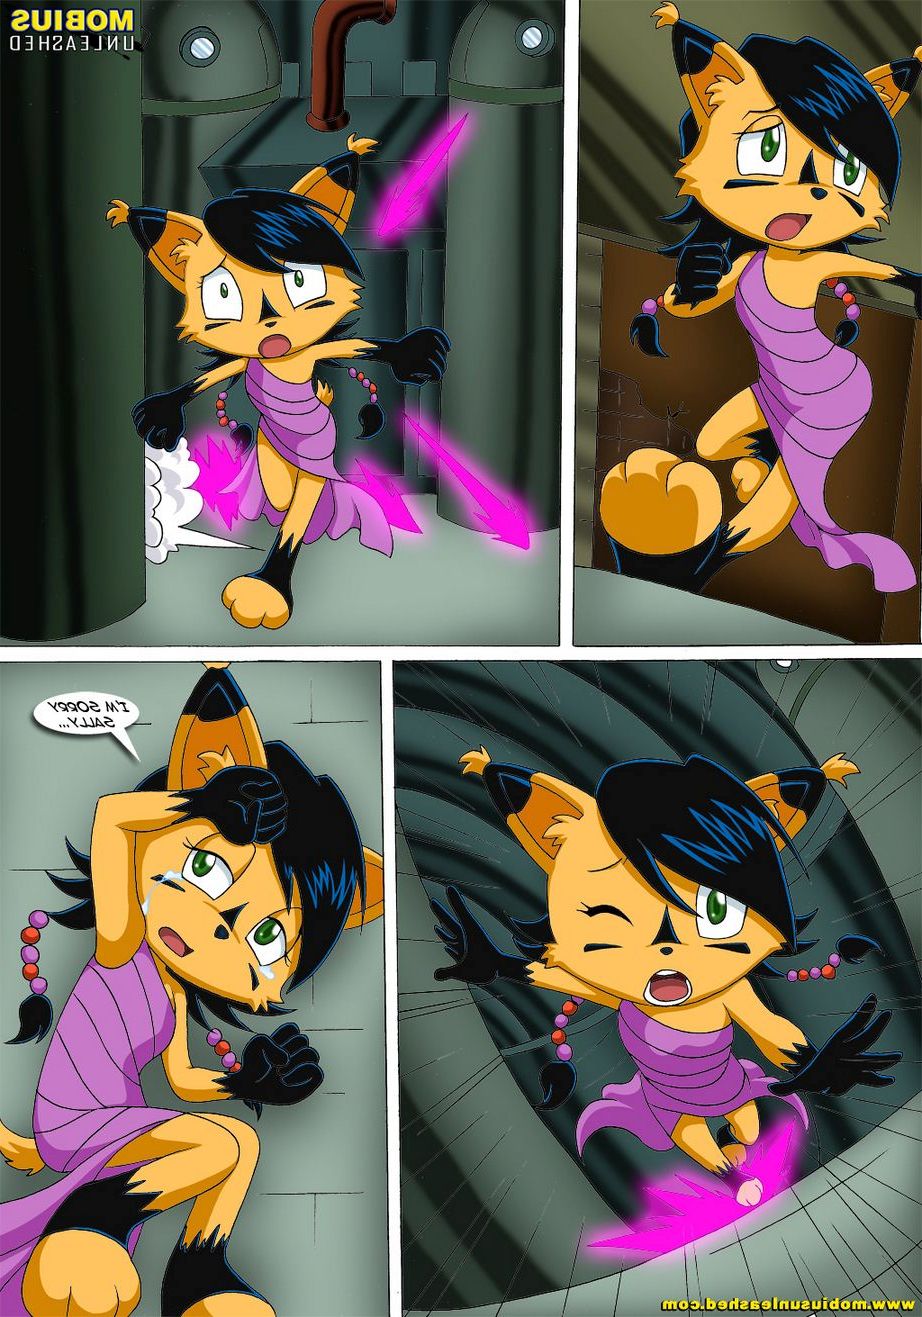 sonic-comix-caught-tail image_18585.jpg